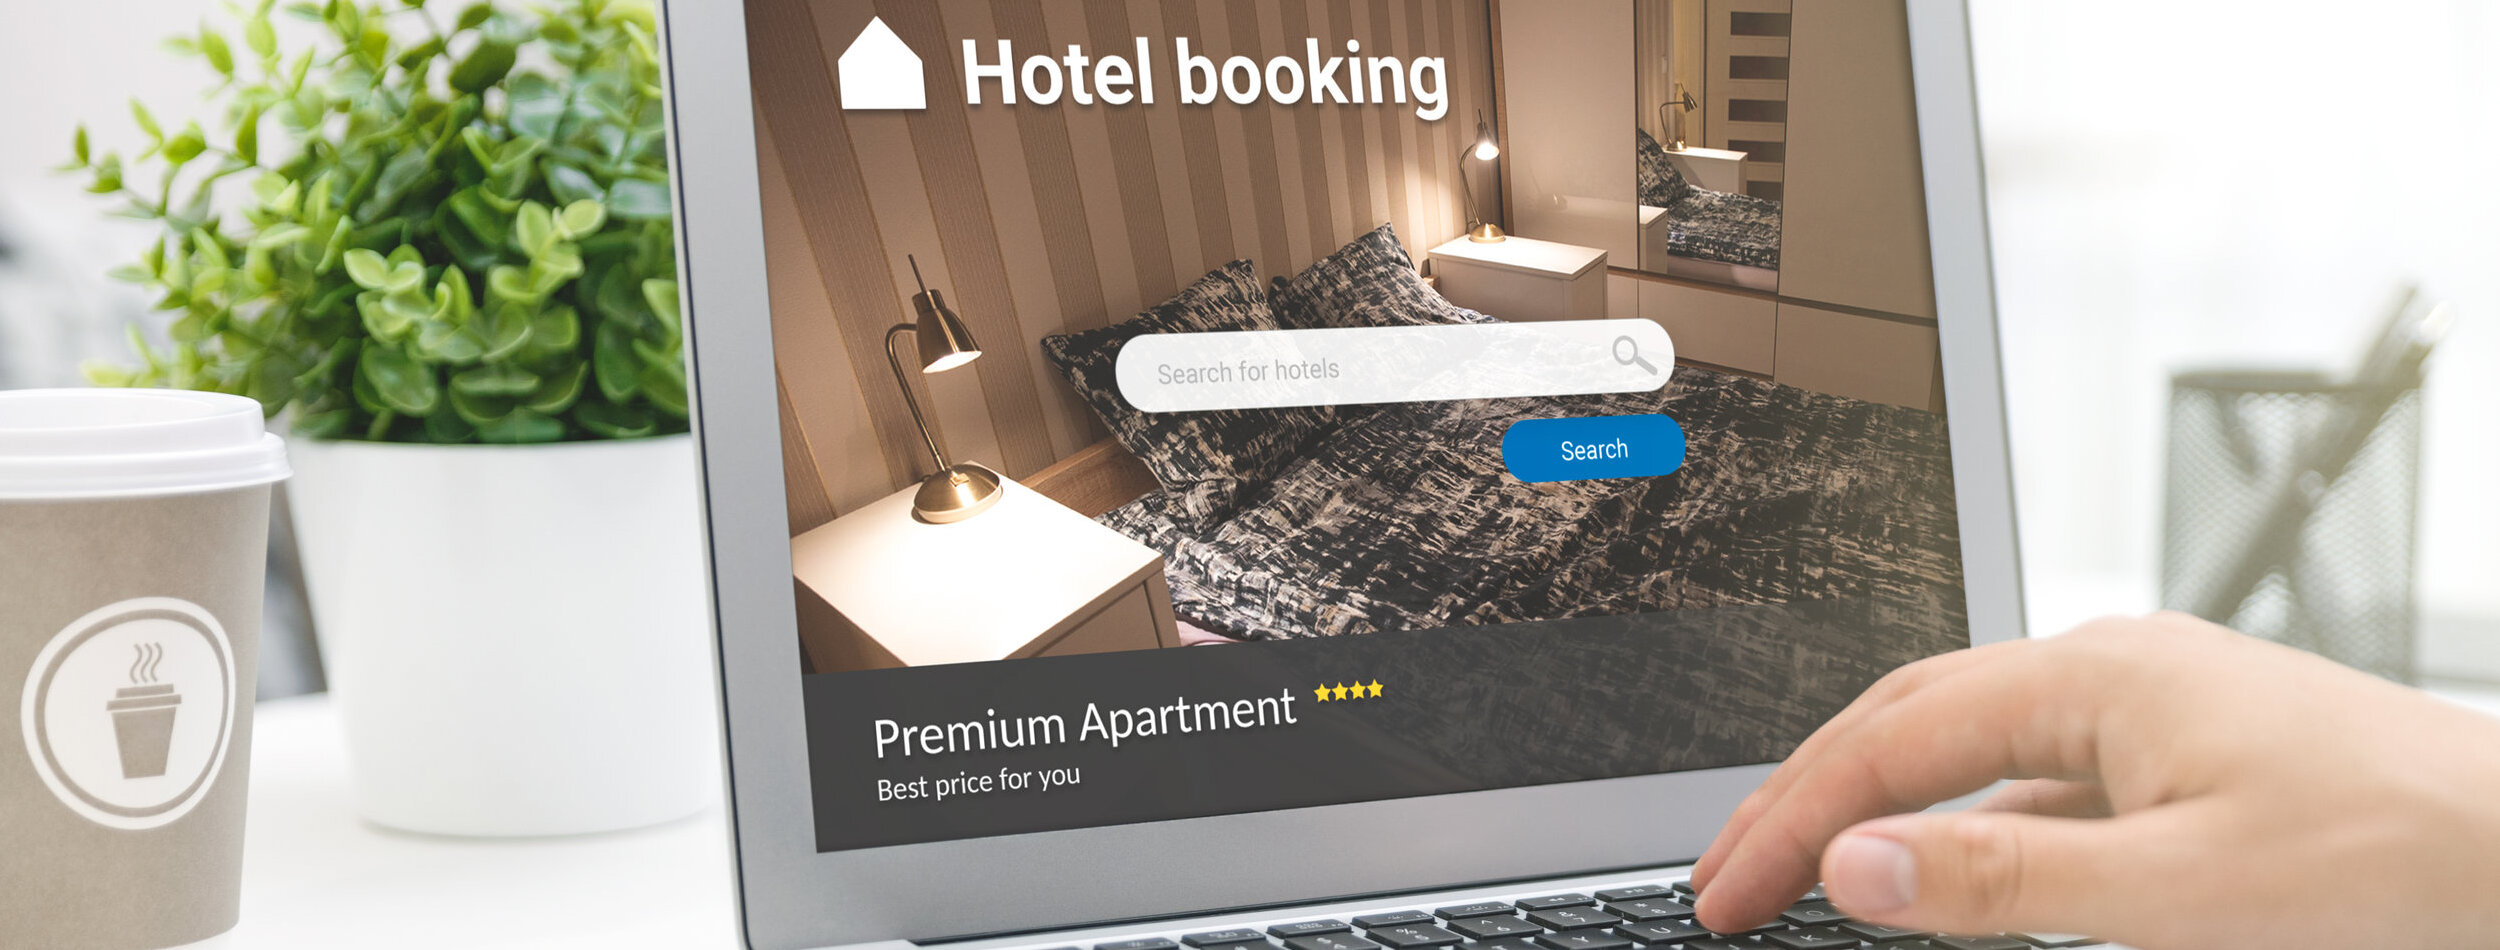 Man makes hotel reservations via the internet. Tourism, vacation concept